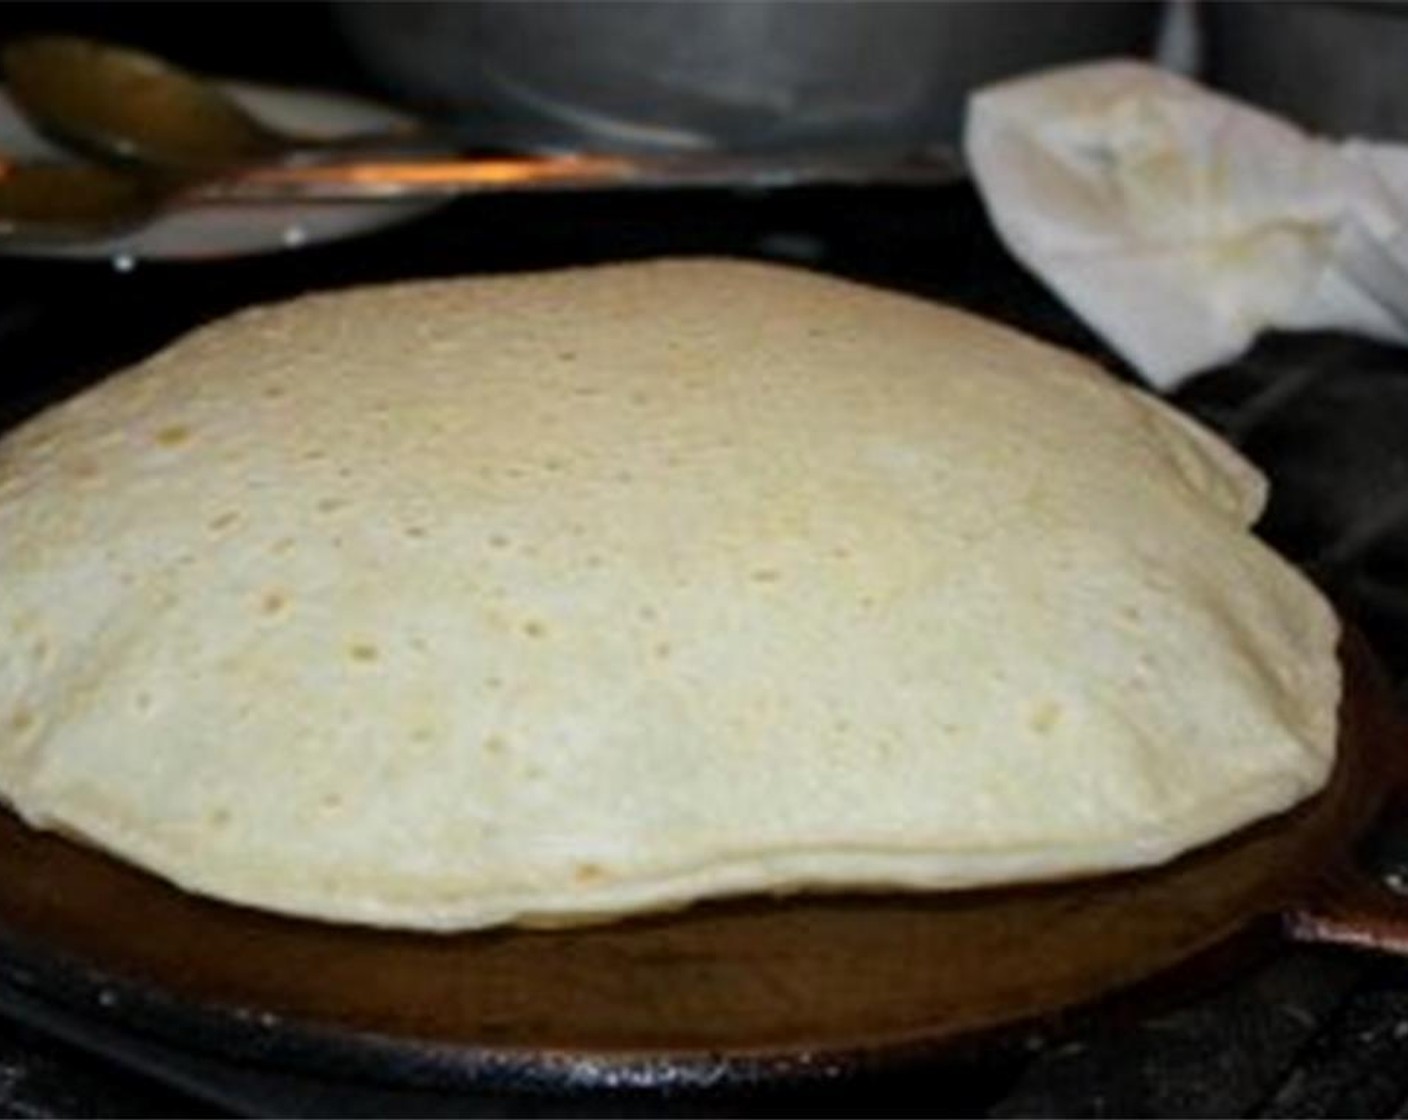 step 11 It will take about 4-6 minutes to fully cook and you’ll notice that it will start to “swell” or inflate as it cooks. That’s a sign that it’s ready to be removed off the tawa. Repeat this step for the remaining 6 roti.